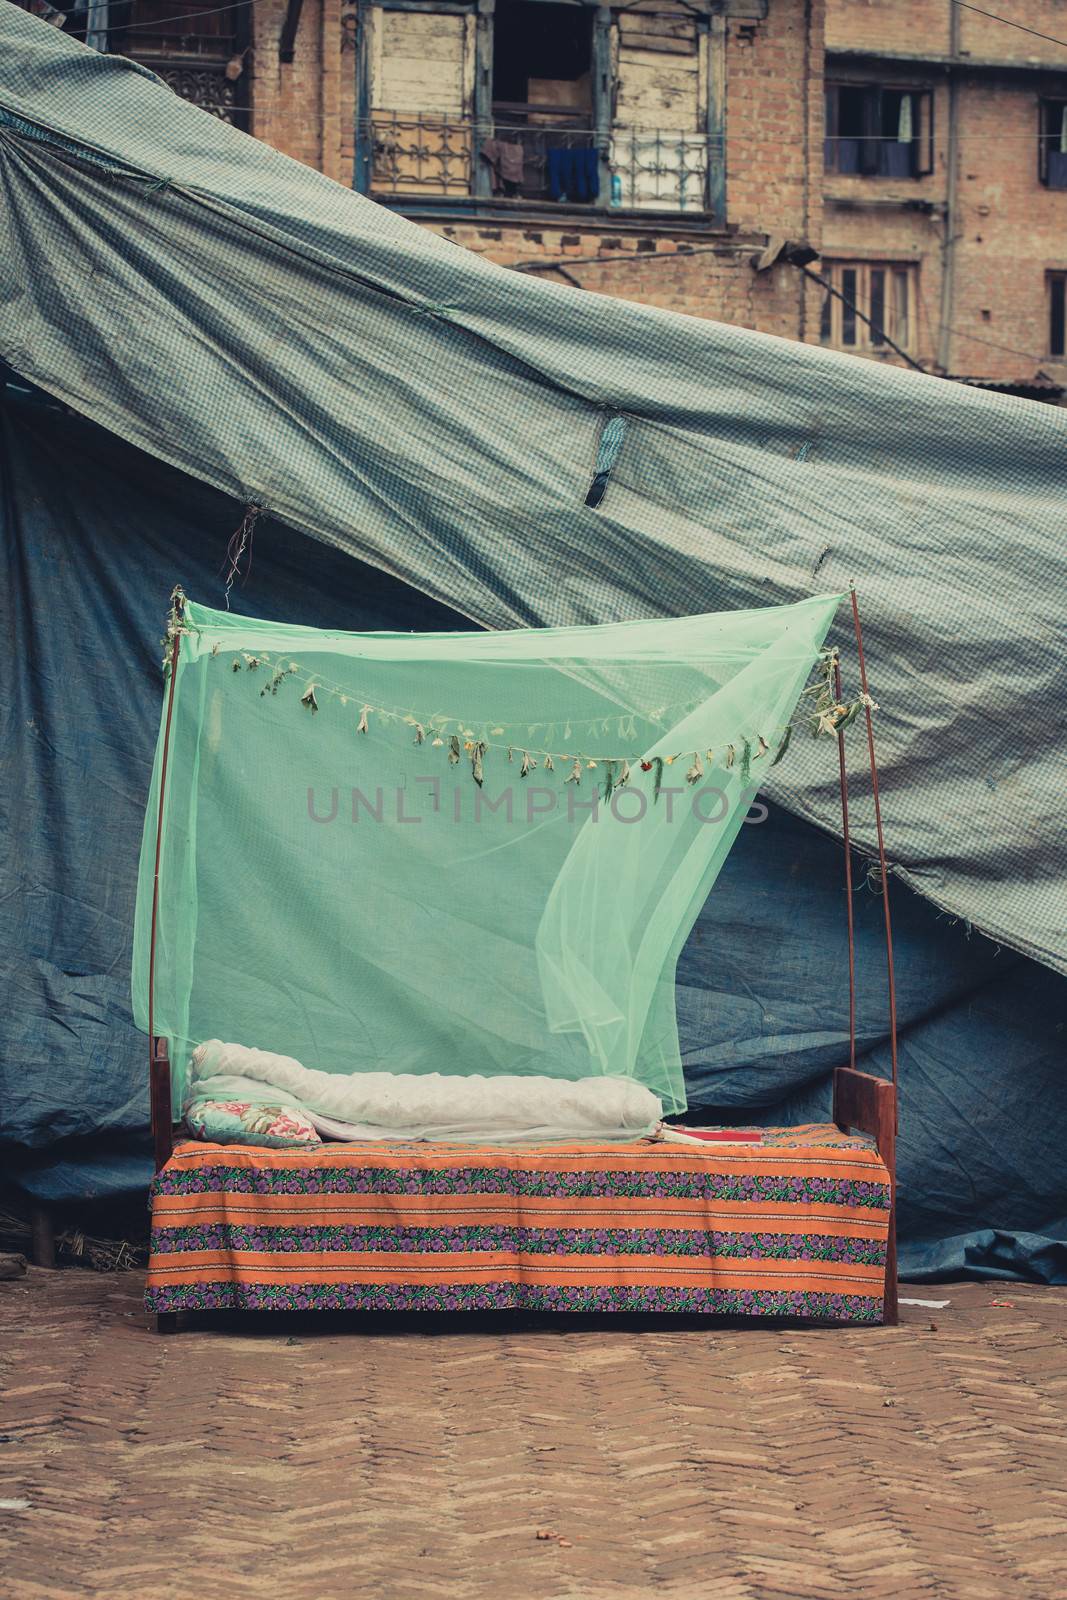 Abandoned bed in the street of Bhaktapur in Nepal, 2013.